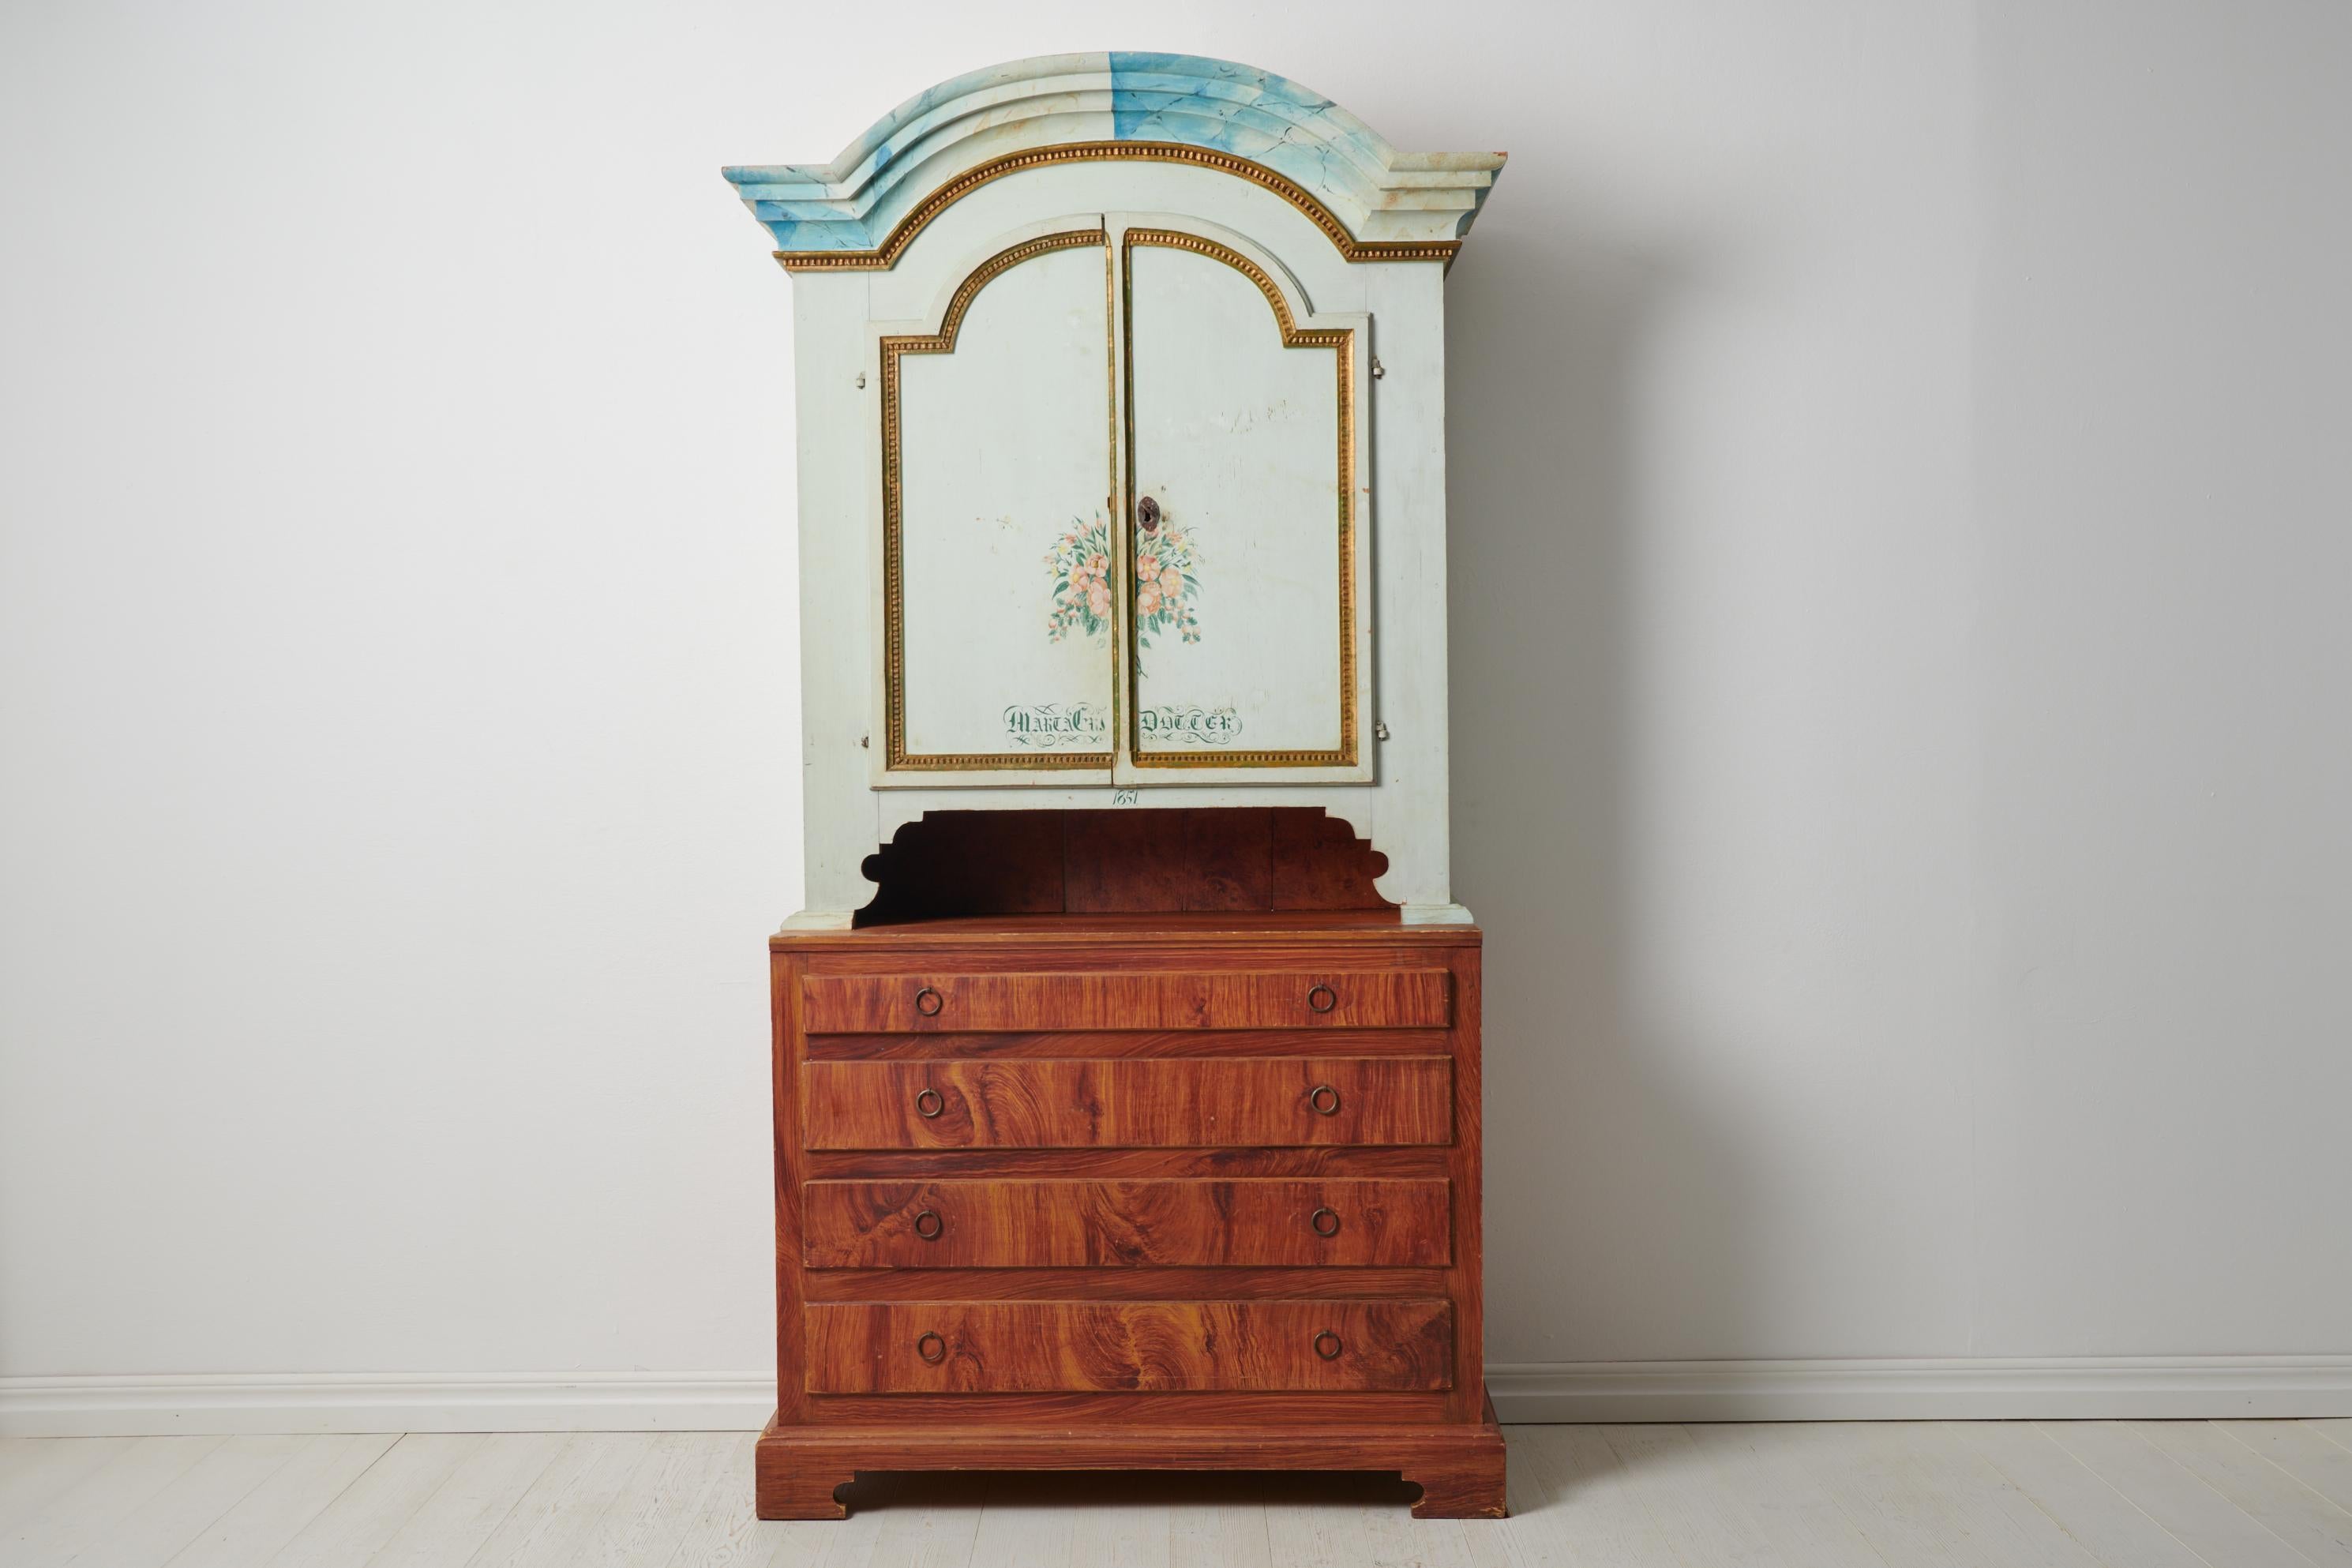 Genuine country rococo cabinet from northern Sweden dated 1851. Elevate your space with the timeless charm of this genuine country rococo cabinet from northern Sweden, a true treasure dating back to the mid 1800s. Hailing from the picturesque